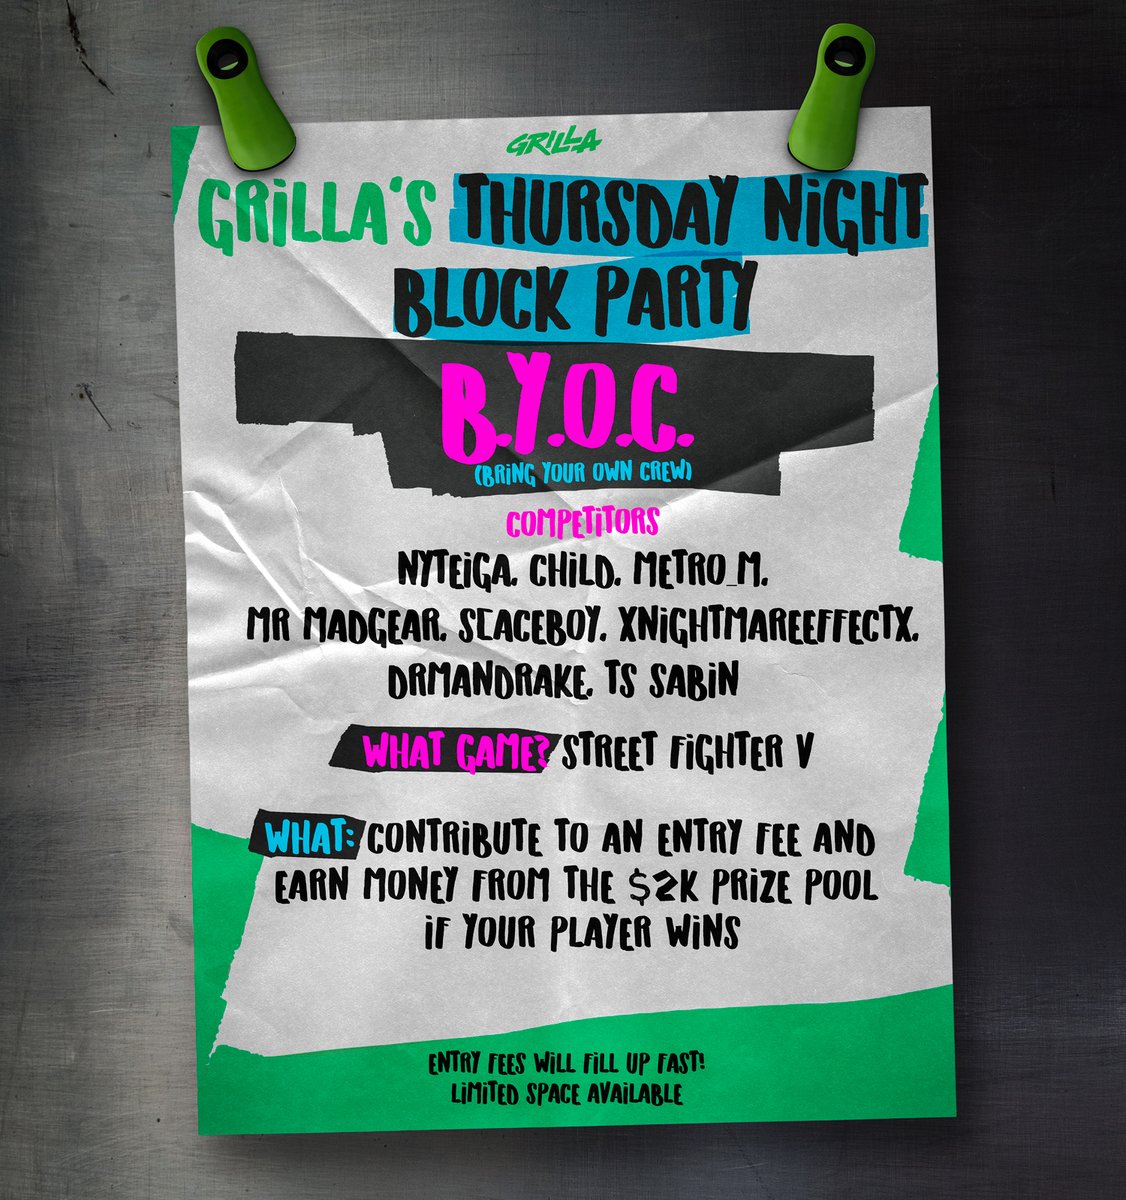 CALLING ALL SFV FANS! 🚨 Want to support your favorite players and take home a piece of the action if your favorite player wins? 💵🔥 GRILLA'S BLOCK PARTY THURSDAY @ 7PM 🗓️ SUPPORT YOUR FAV PLAYER⬇️ grilla.gg/g/byoc LIVE ON 📺 twitch.tv/Grilla